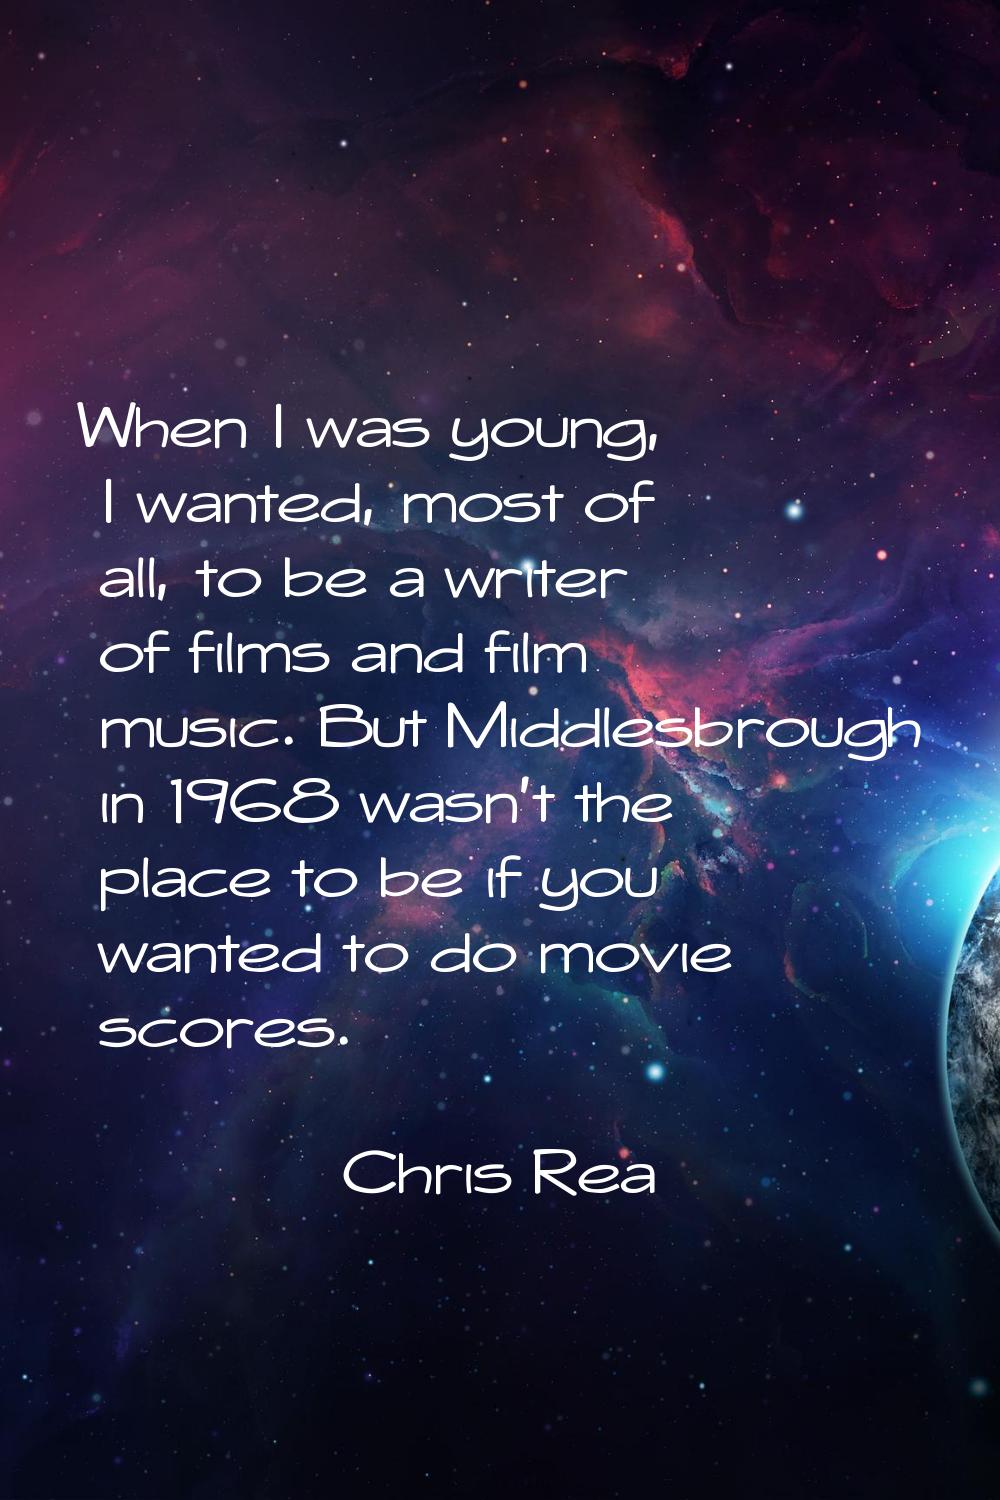 When I was young, I wanted, most of all, to be a writer of films and film music. But Middlesbrough 